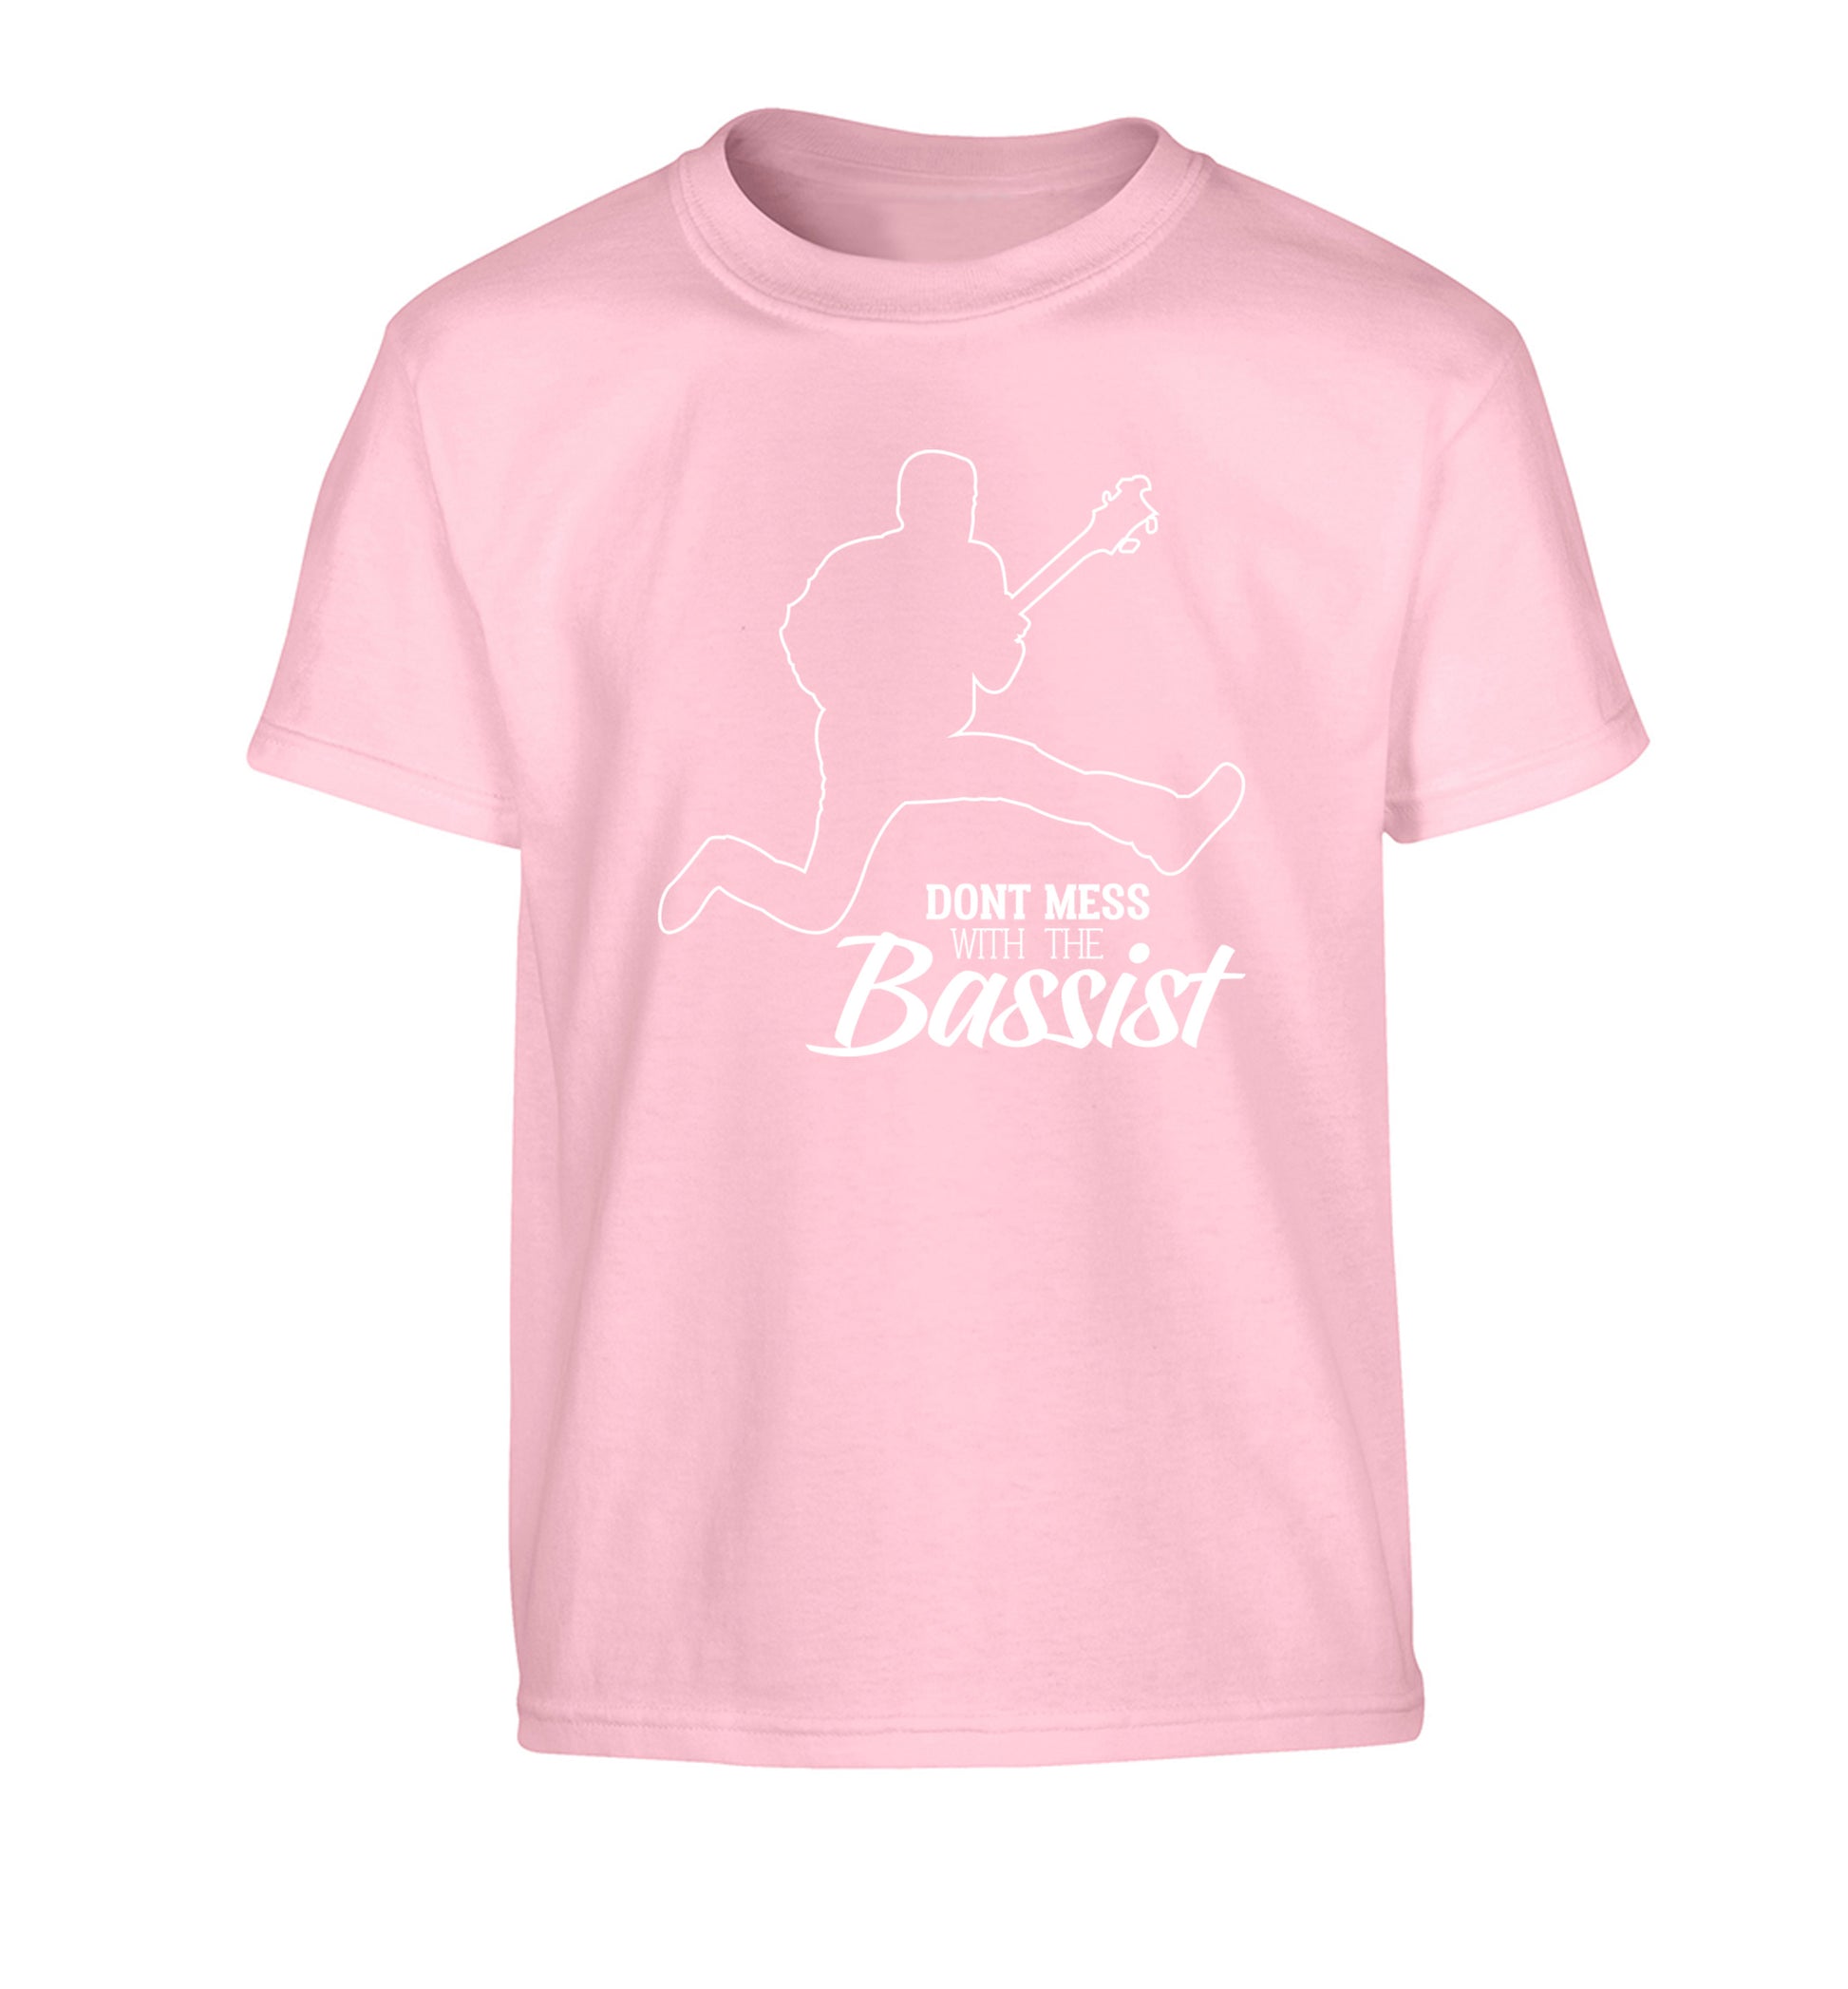 Dont mess with the bassist Children's light pink Tshirt 12-13 Years